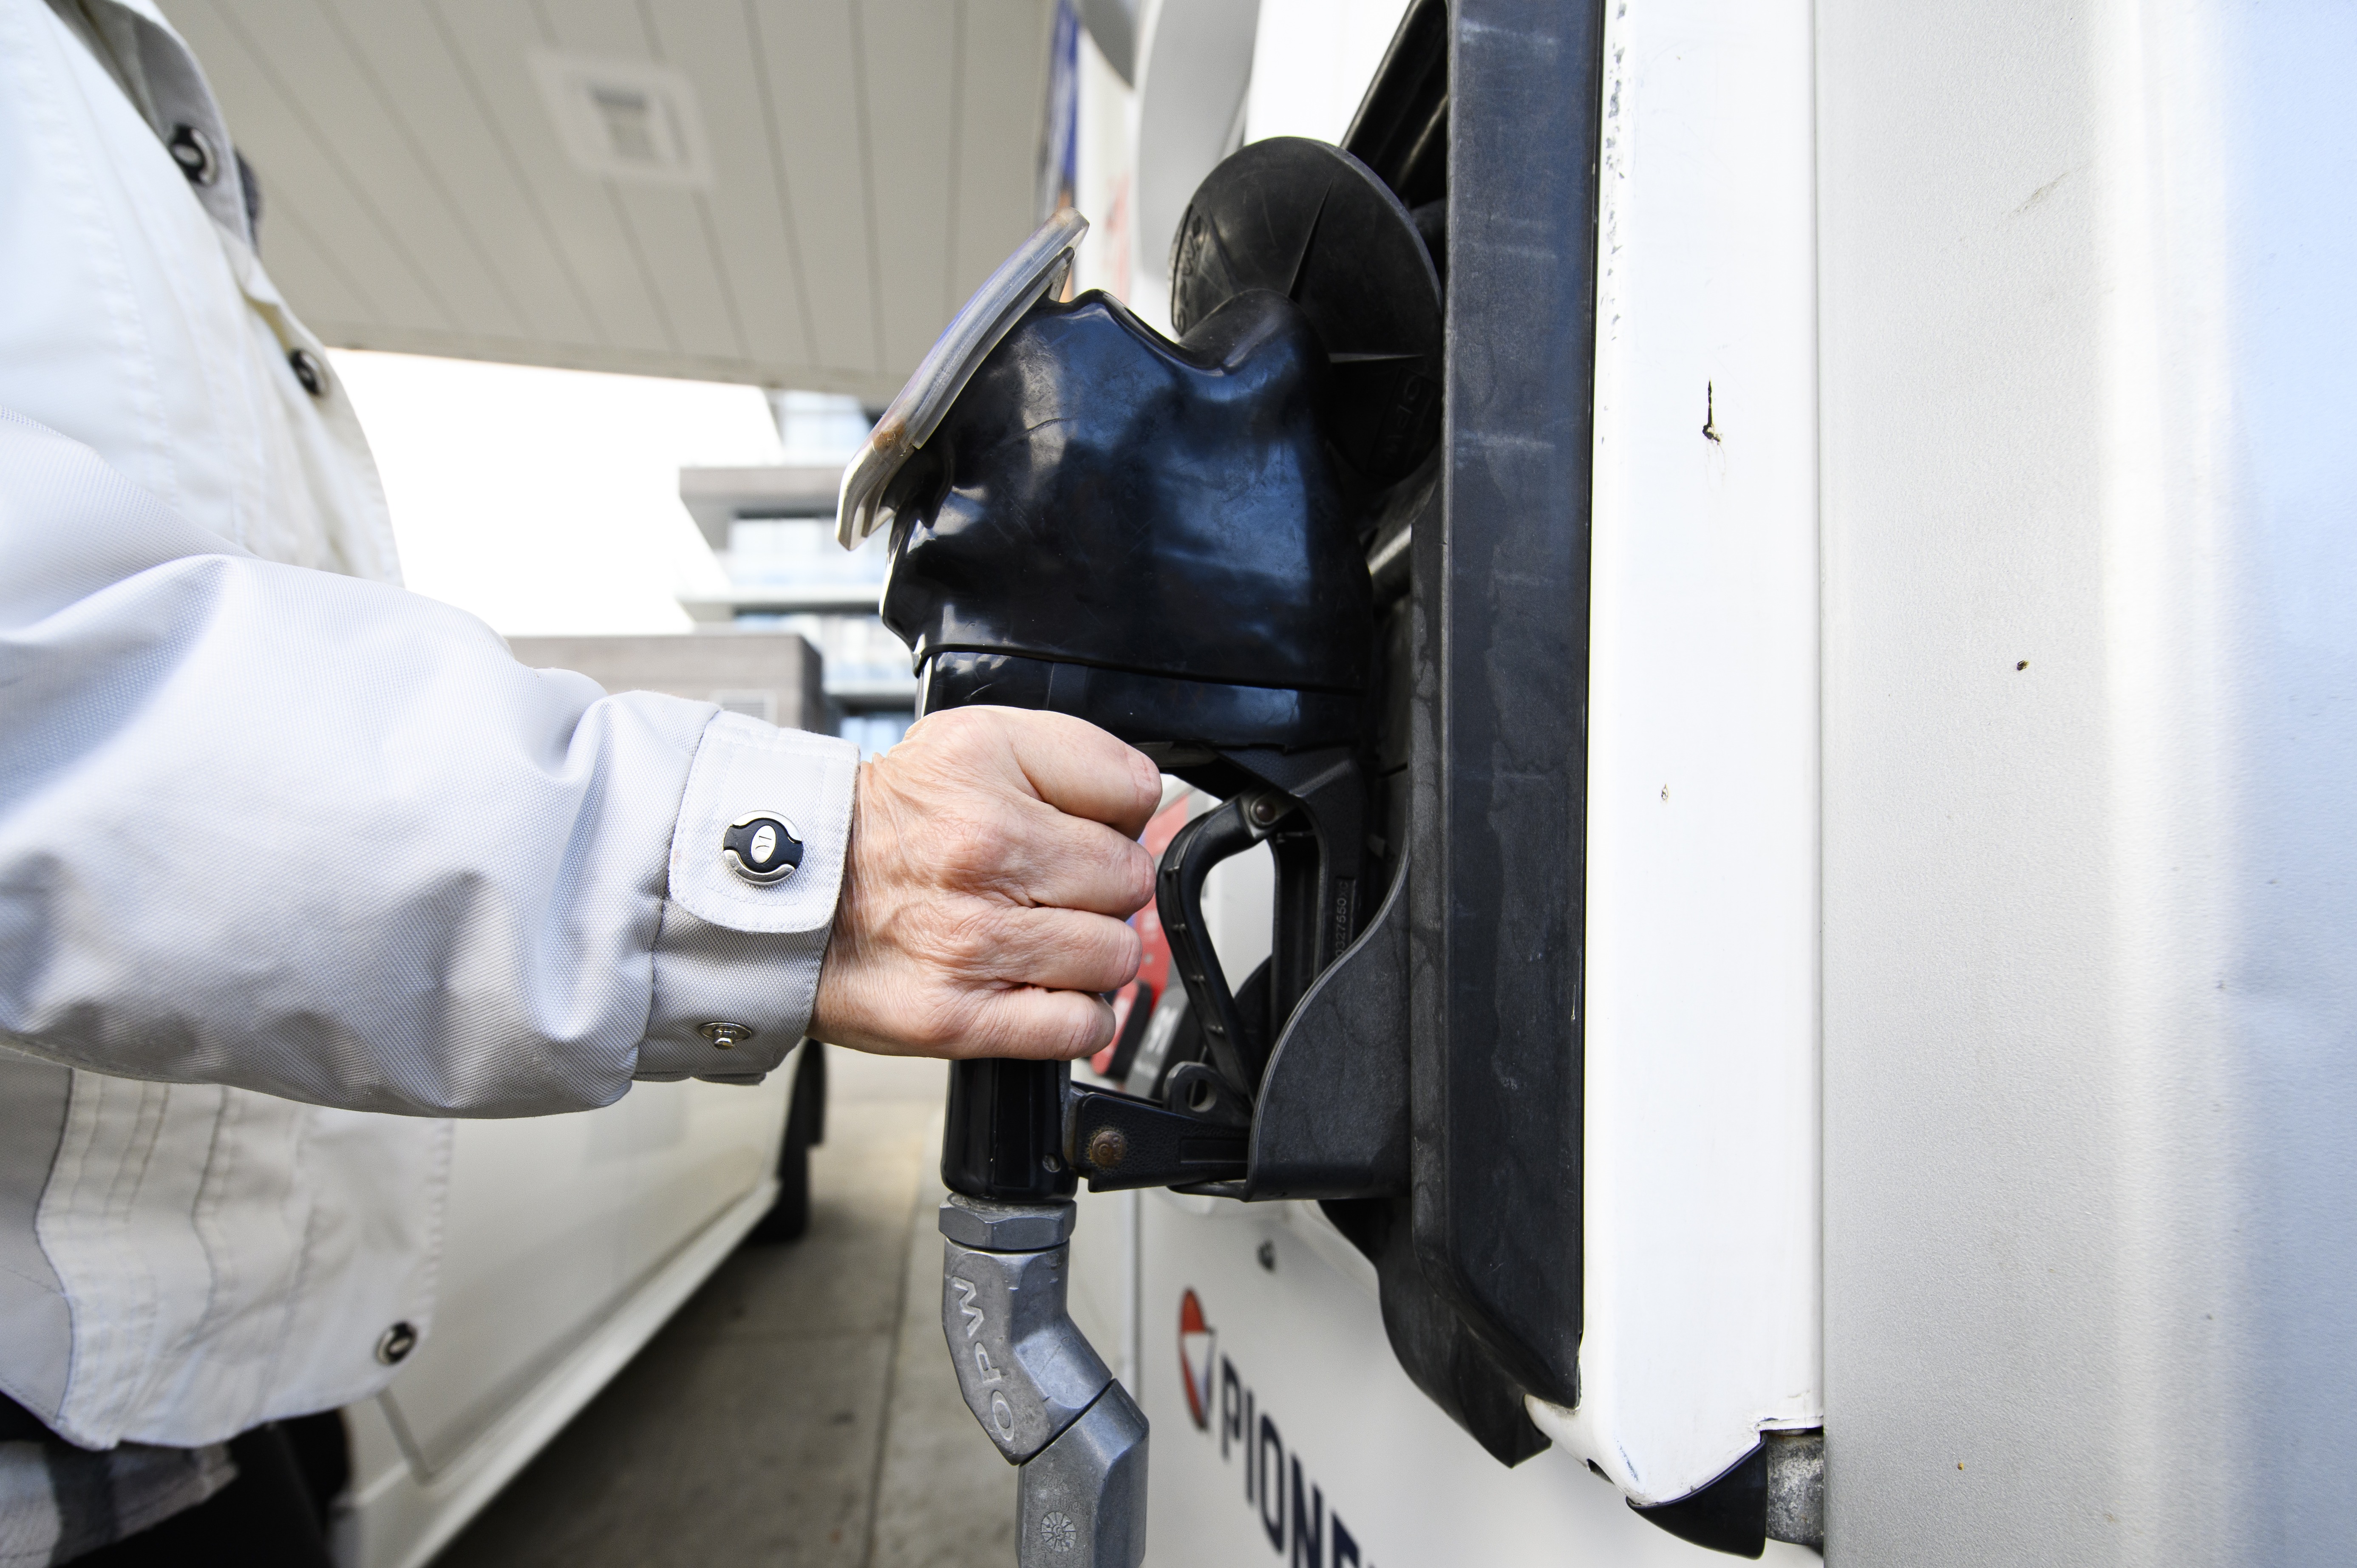 Alberta to increase fuel tax by 4 cents starting April 1